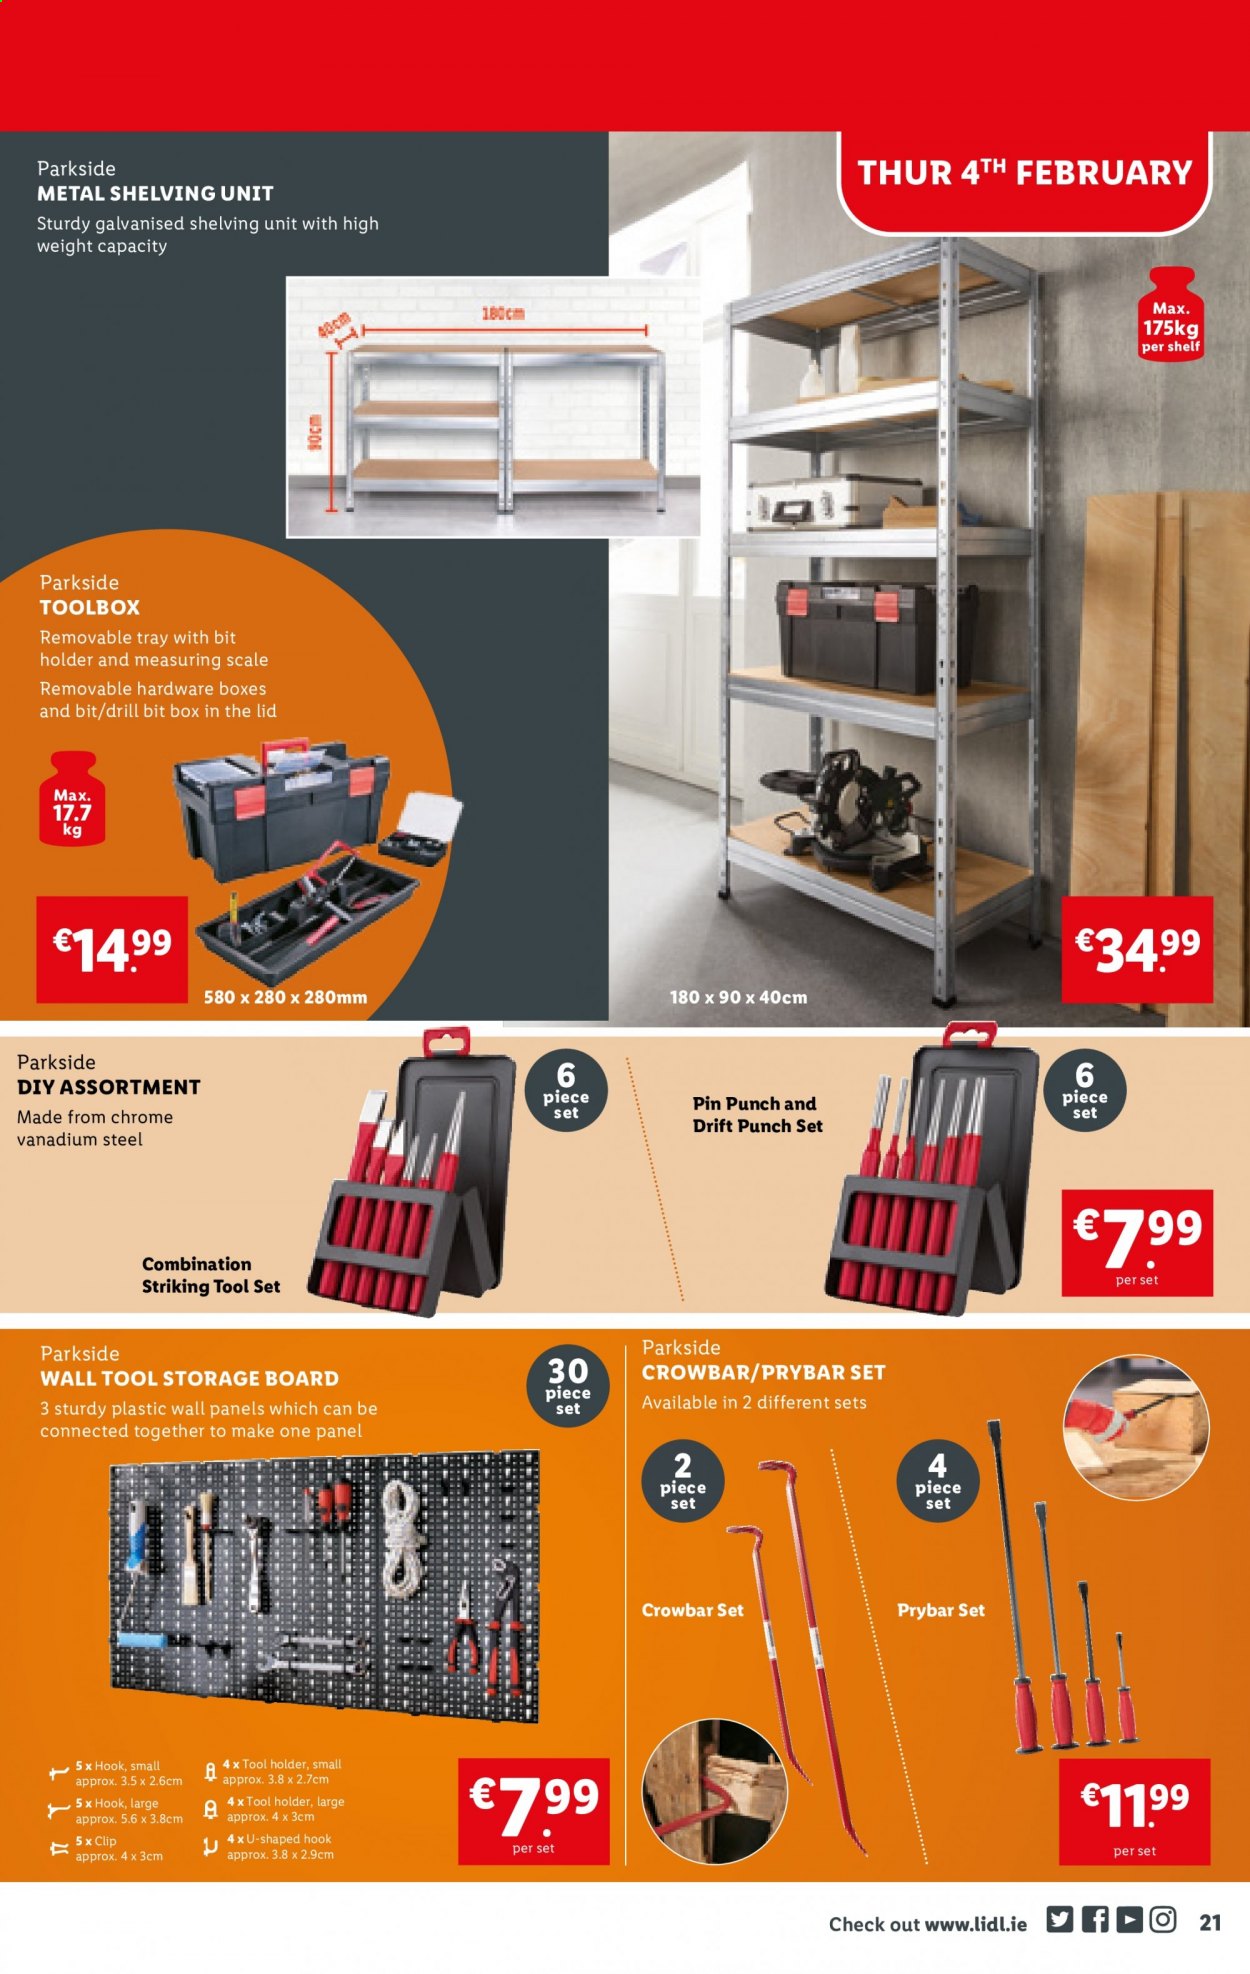 thumbnail - Lidl offer  - 04.02.2021 - 10.02.2021 - Sales products - hook, pin, shelf unit, Parkside, pry bar, tool box, tool set, crowbar, tool storage board. Page 21.